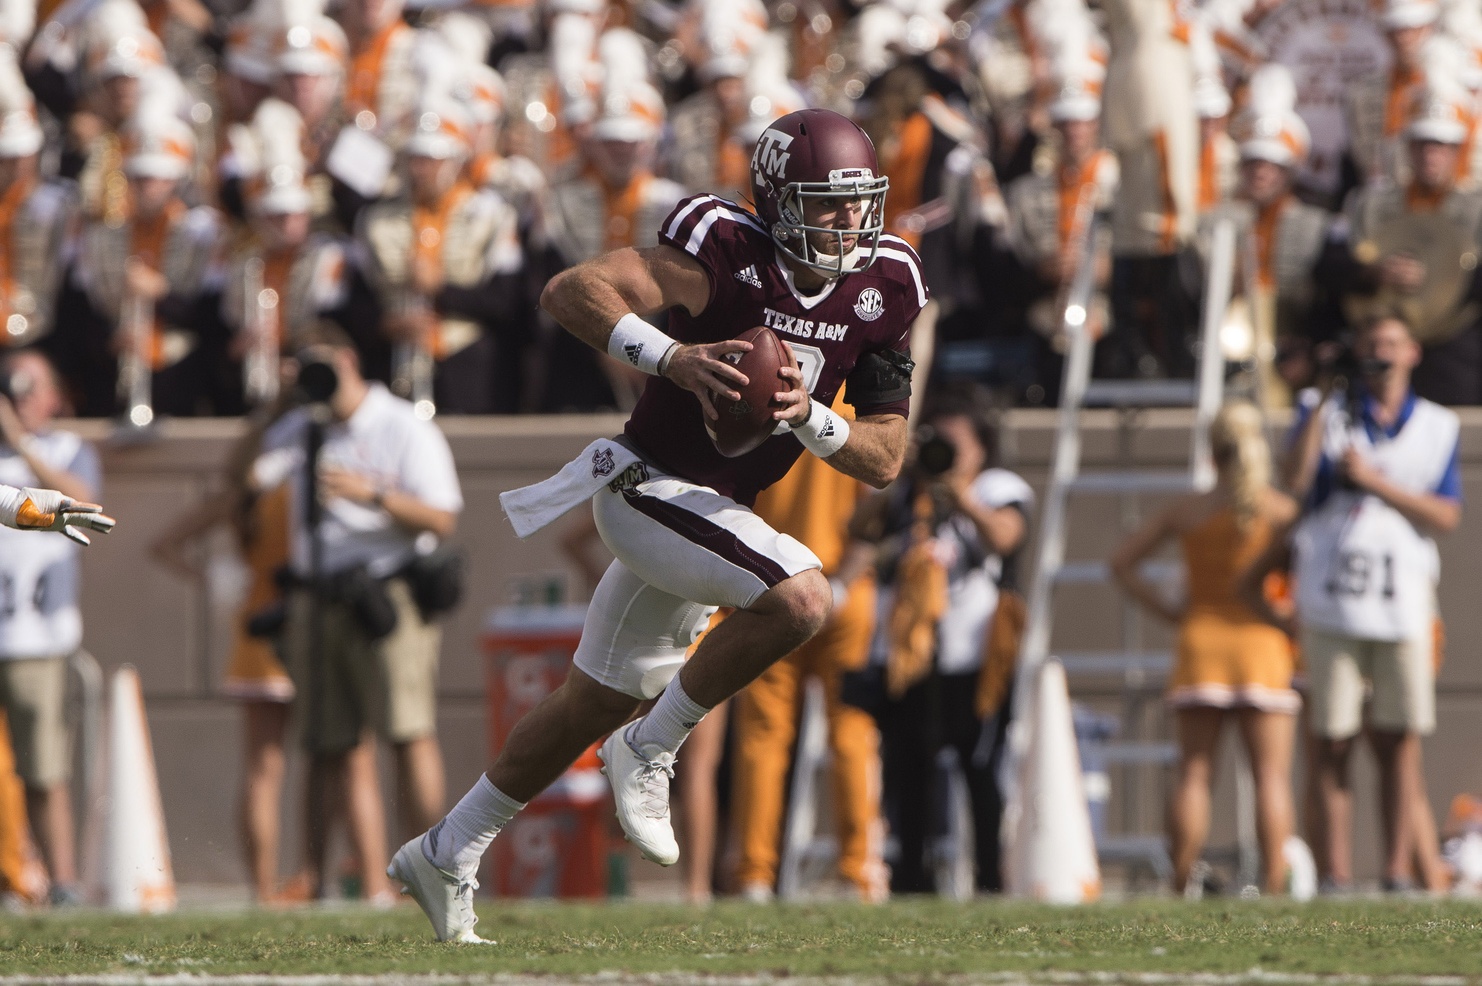 Oct 8, 2016; College Station, TX, USA; Texas A&M Aggies quarterback Trevor Knight (8) runs with the ball against the Tennessee Volunteers during the second quarter at Kyle Field. Mandatory Credit: Jerome Miron-USA TODAY Sports